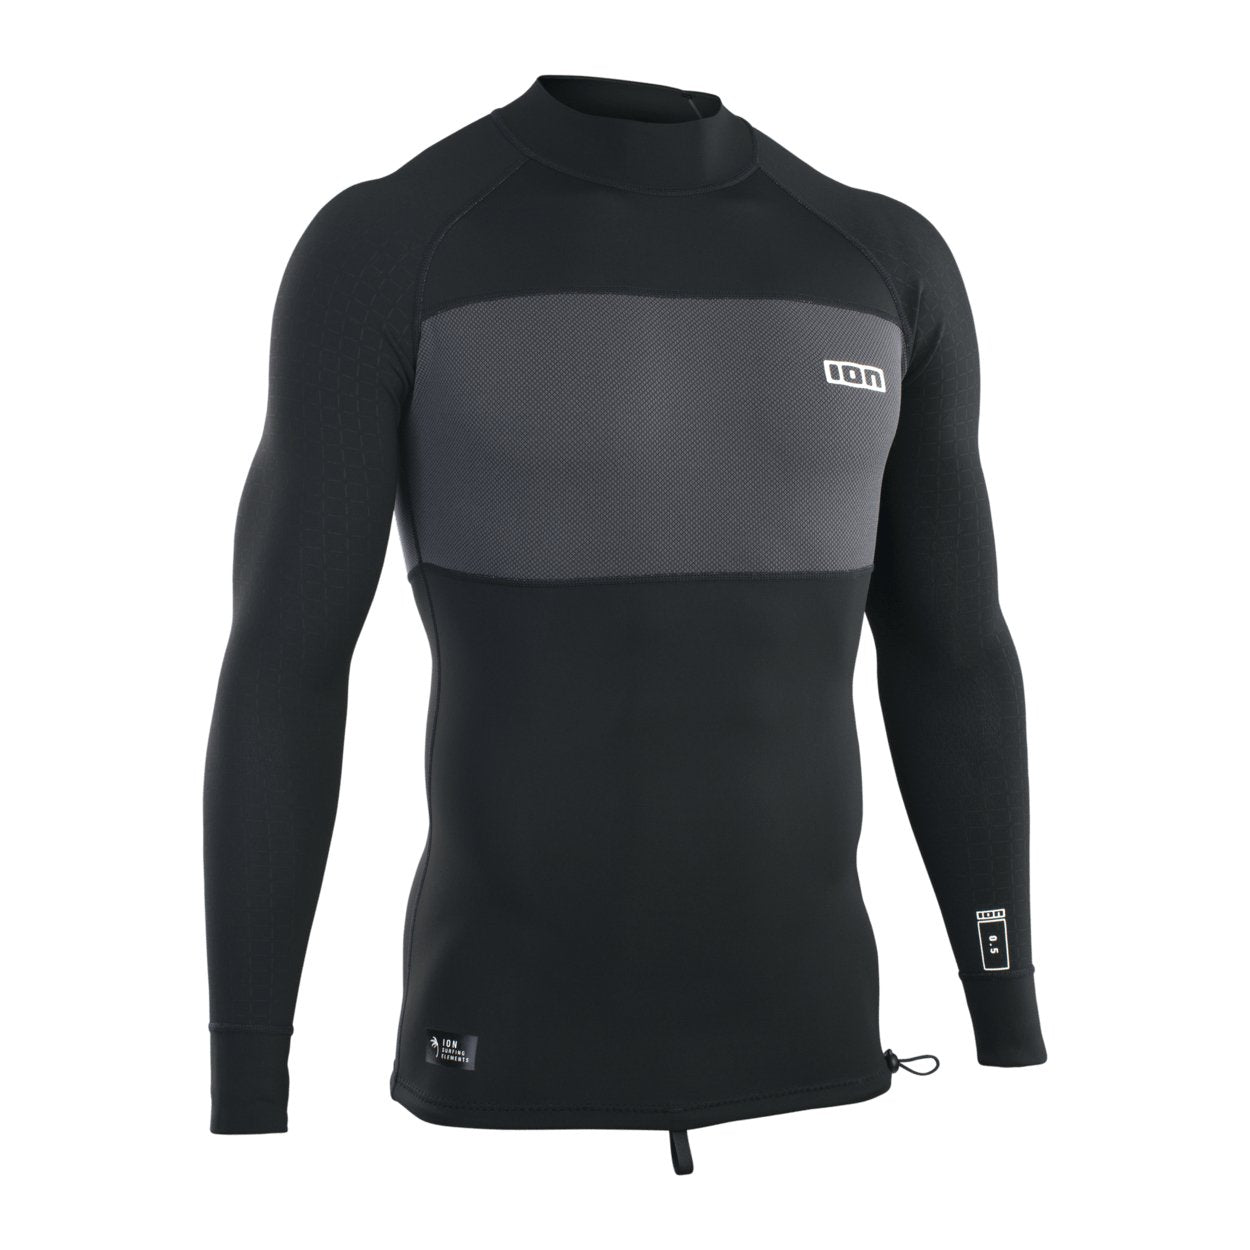 ION Neo Top 0.5 LS men 2023 - Worthing Watersports - 9010583091730 - Tops - ION Water